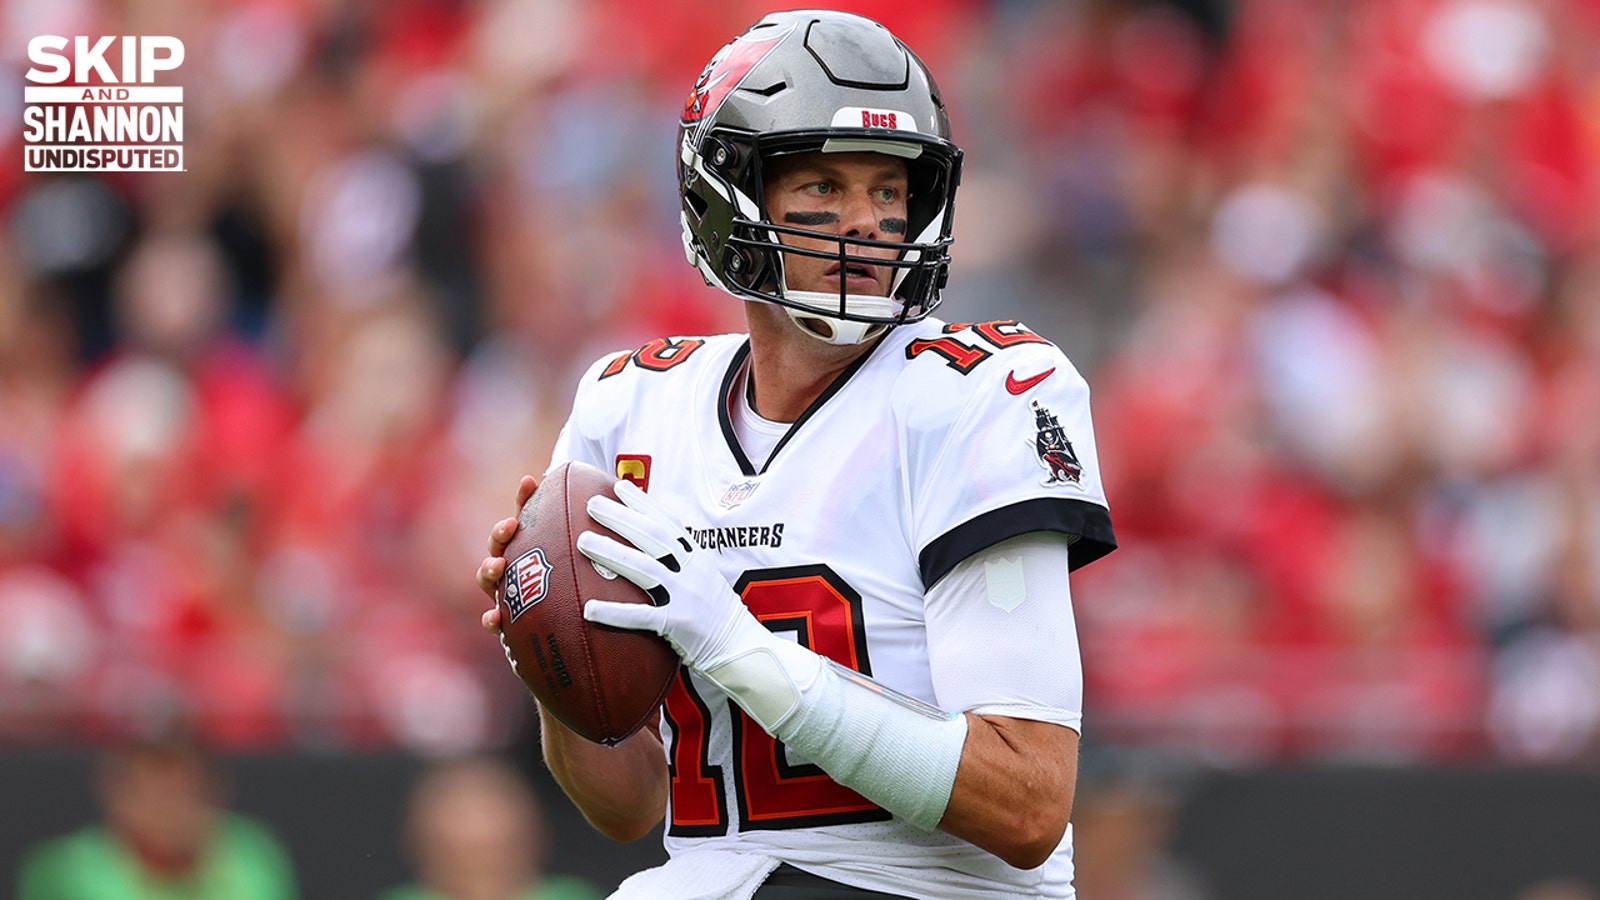 Tom Brady will play Falcons even though Bucs are locked in 4-seed in NFC